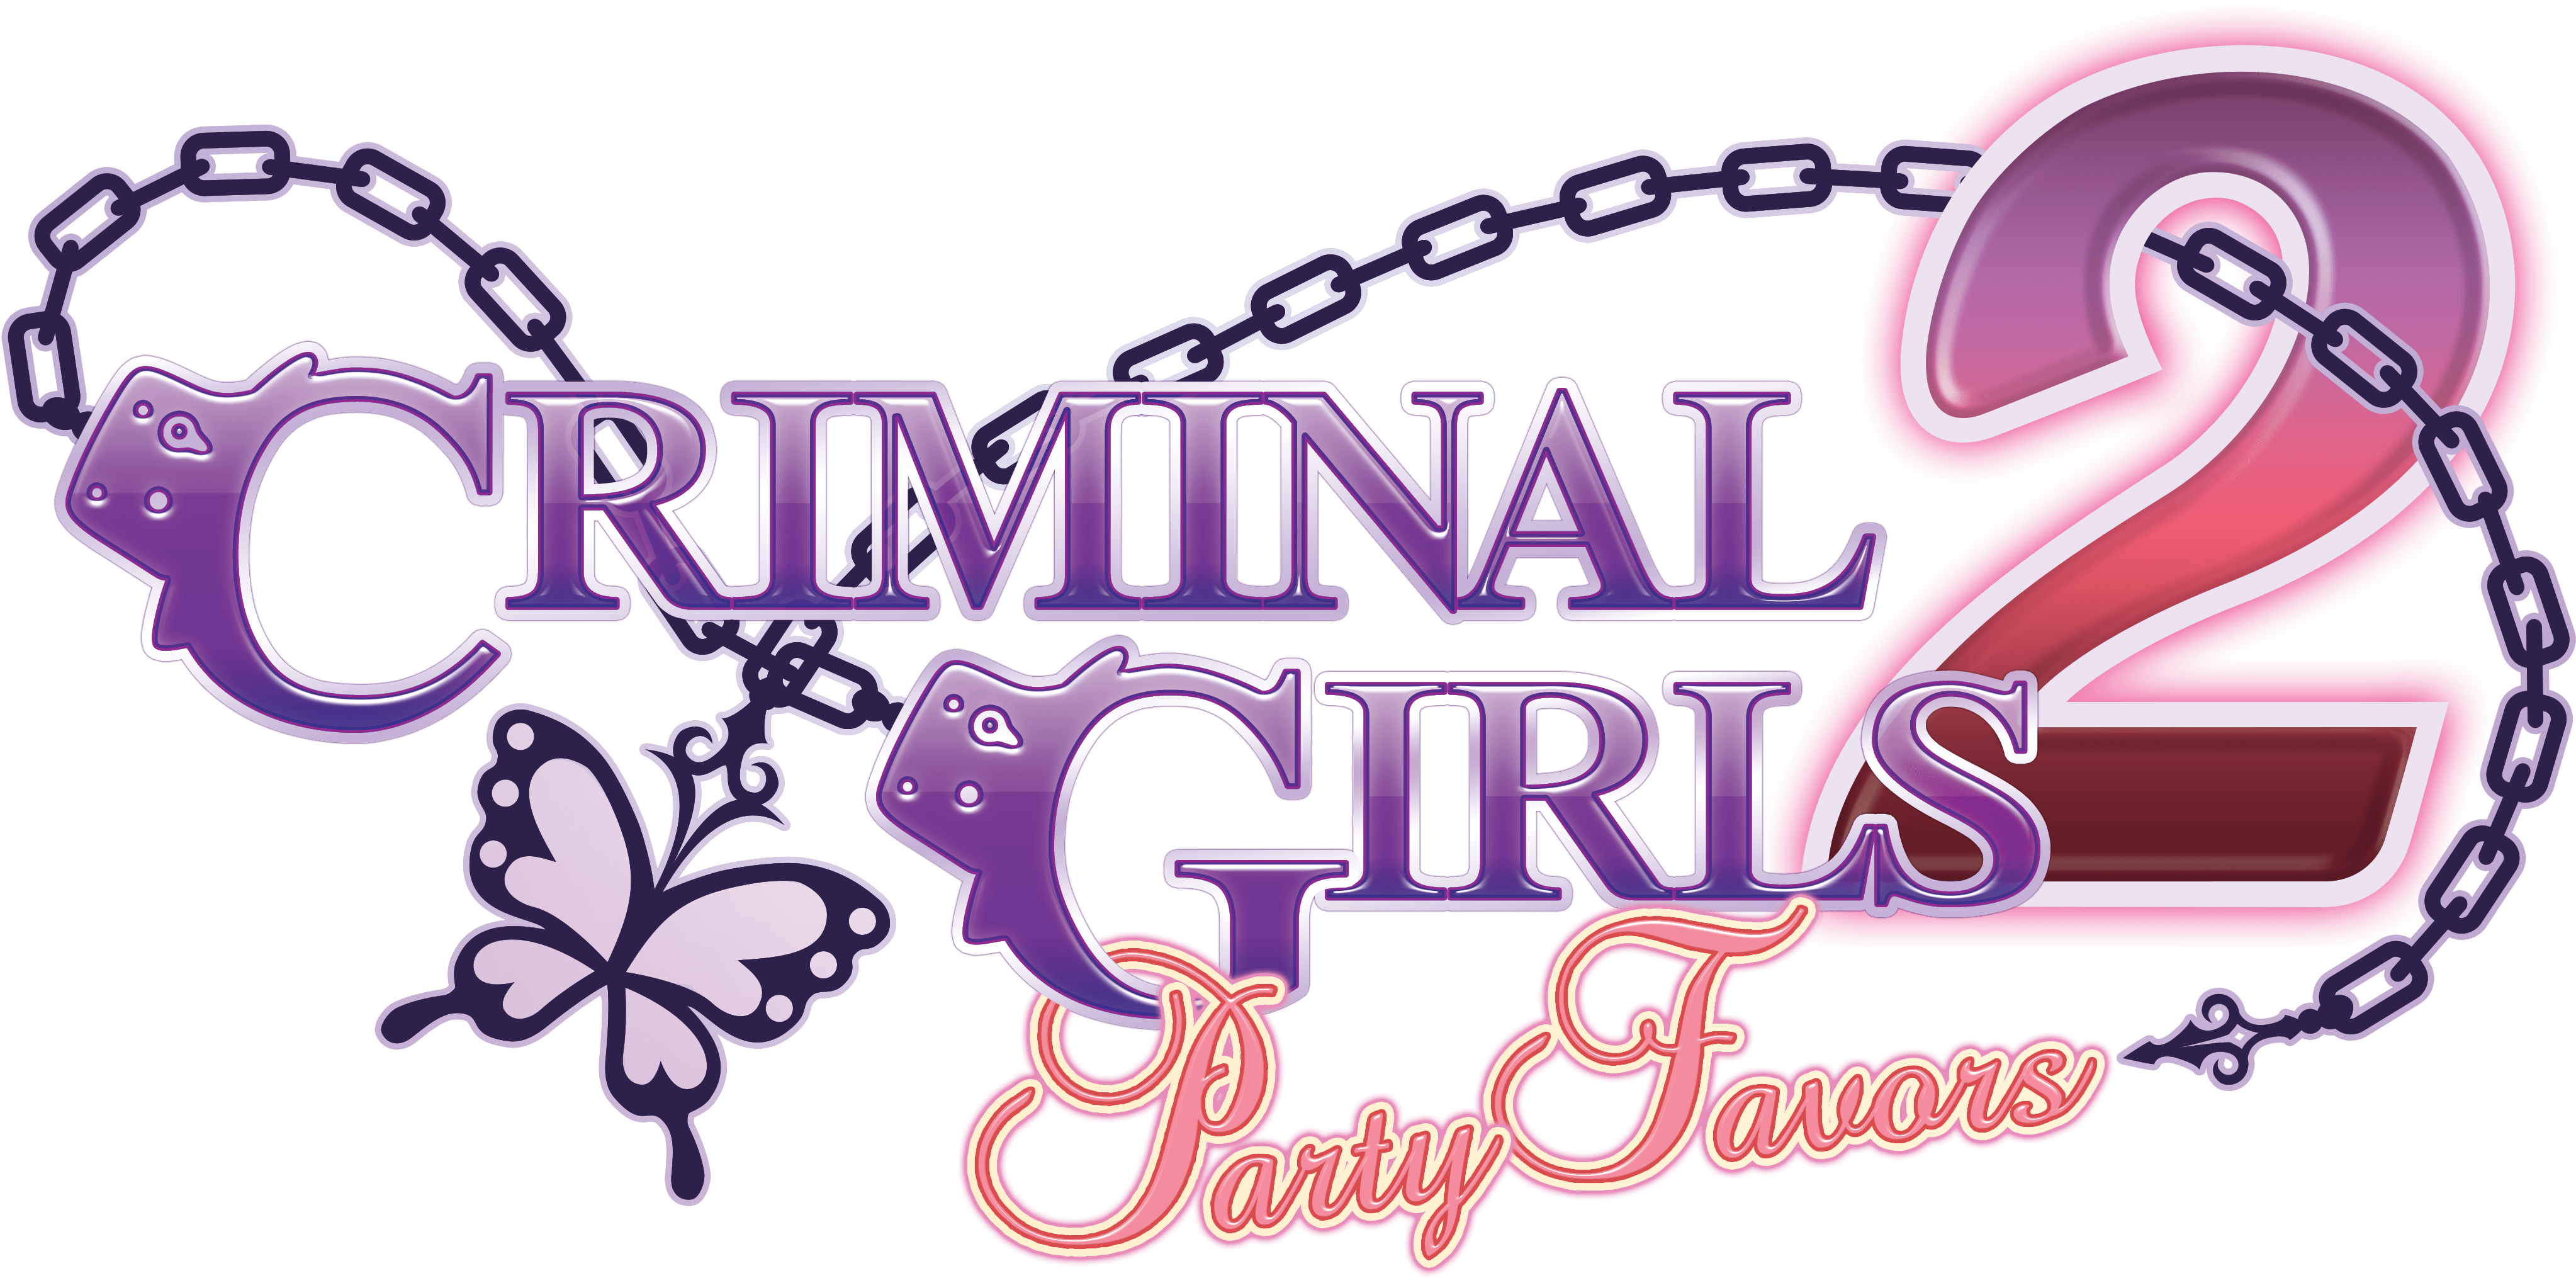 Criminal Girls 2 Party Favors Review The Backlog Rh - Criminal Girls 2 Party Favors (psvita) (4567x2418)